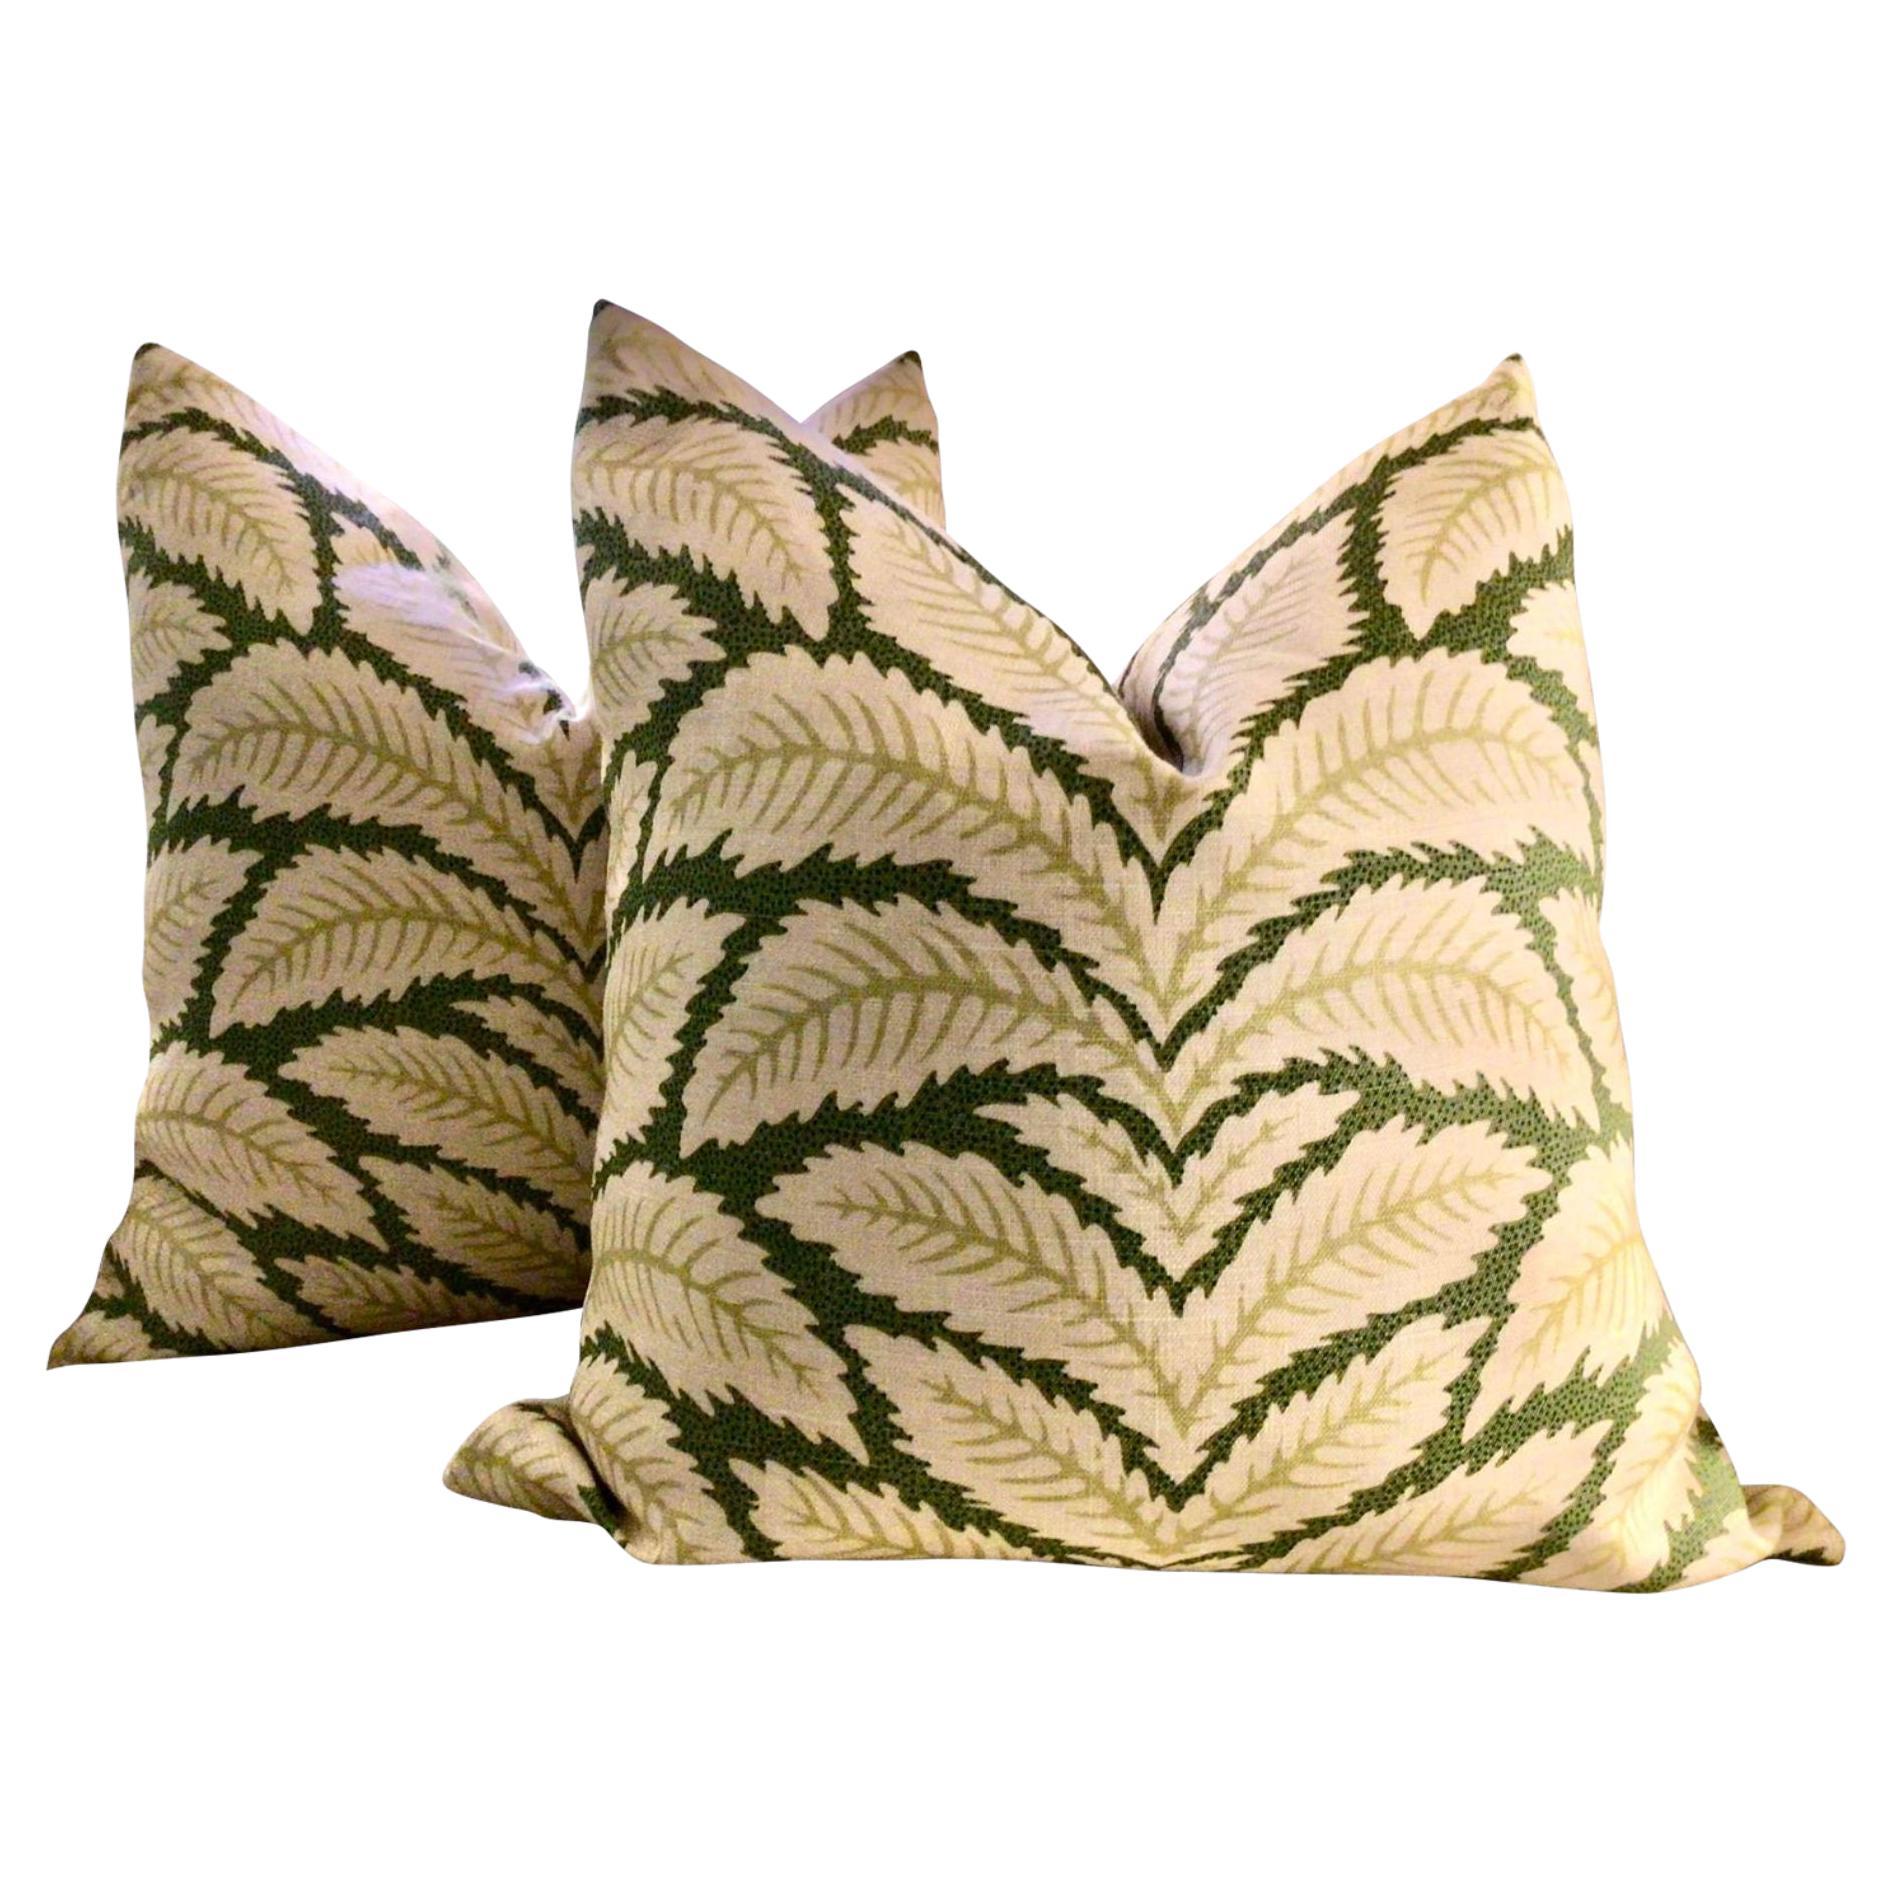 Brunschwig and Fils Talavera in Leaf Pillows- a Pair For Sale